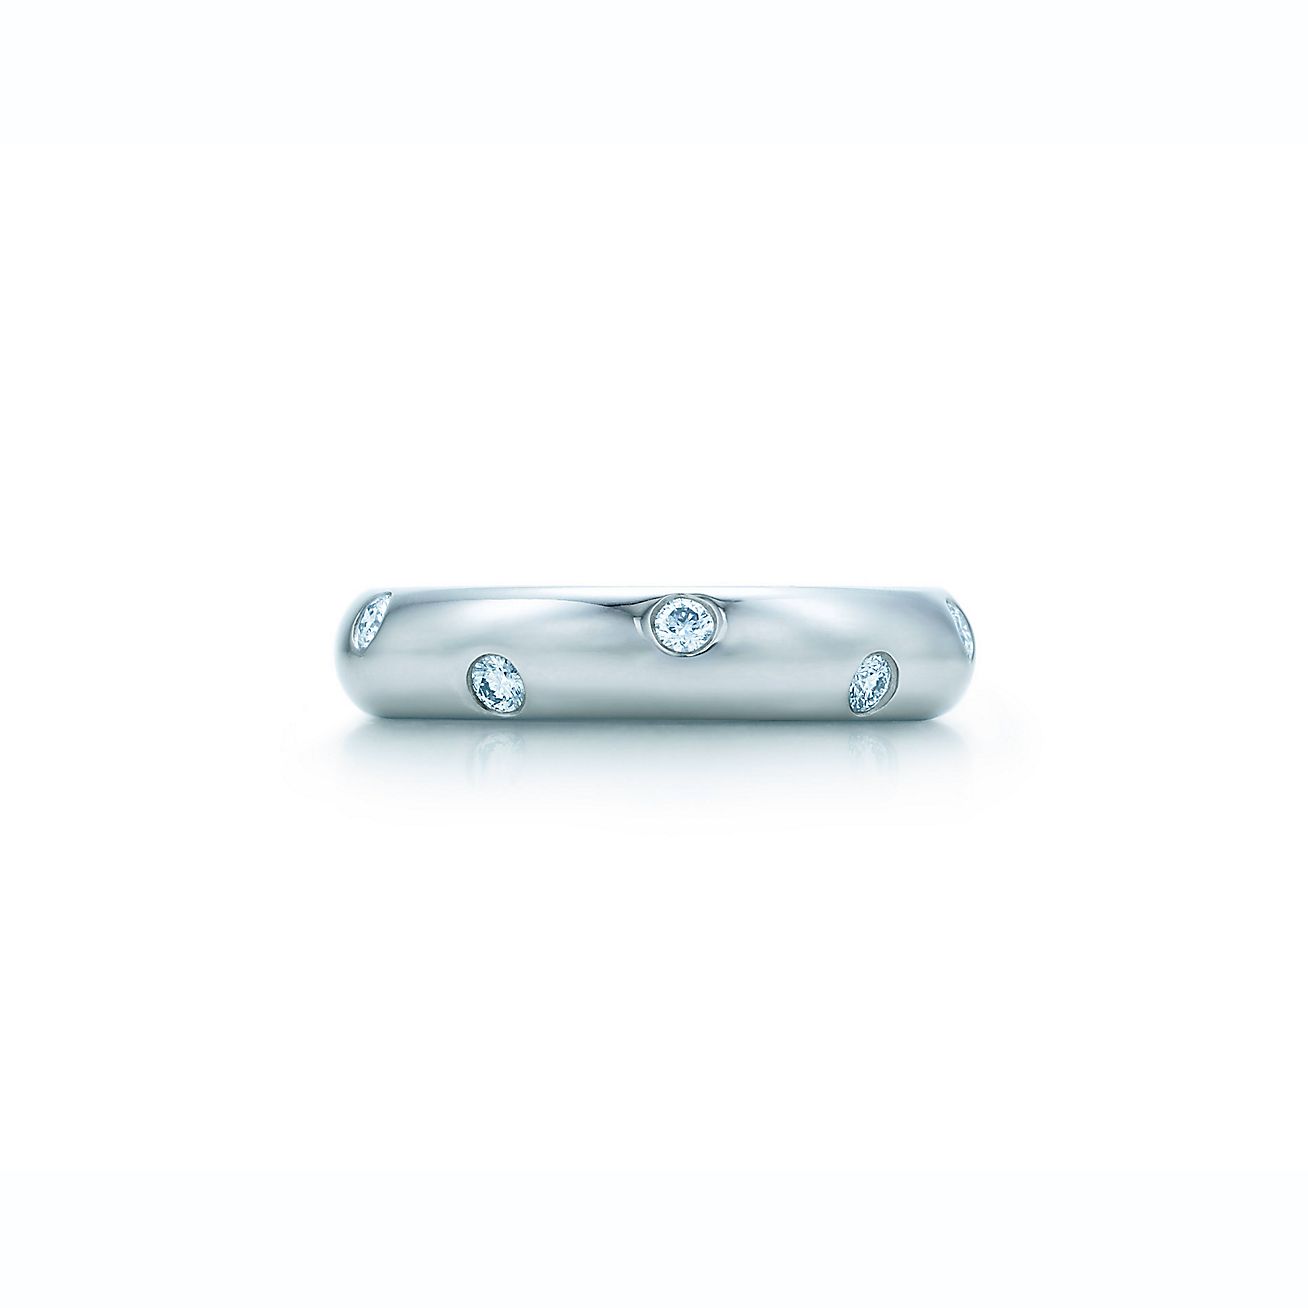 Etoile band ring with diamonds in platinum.